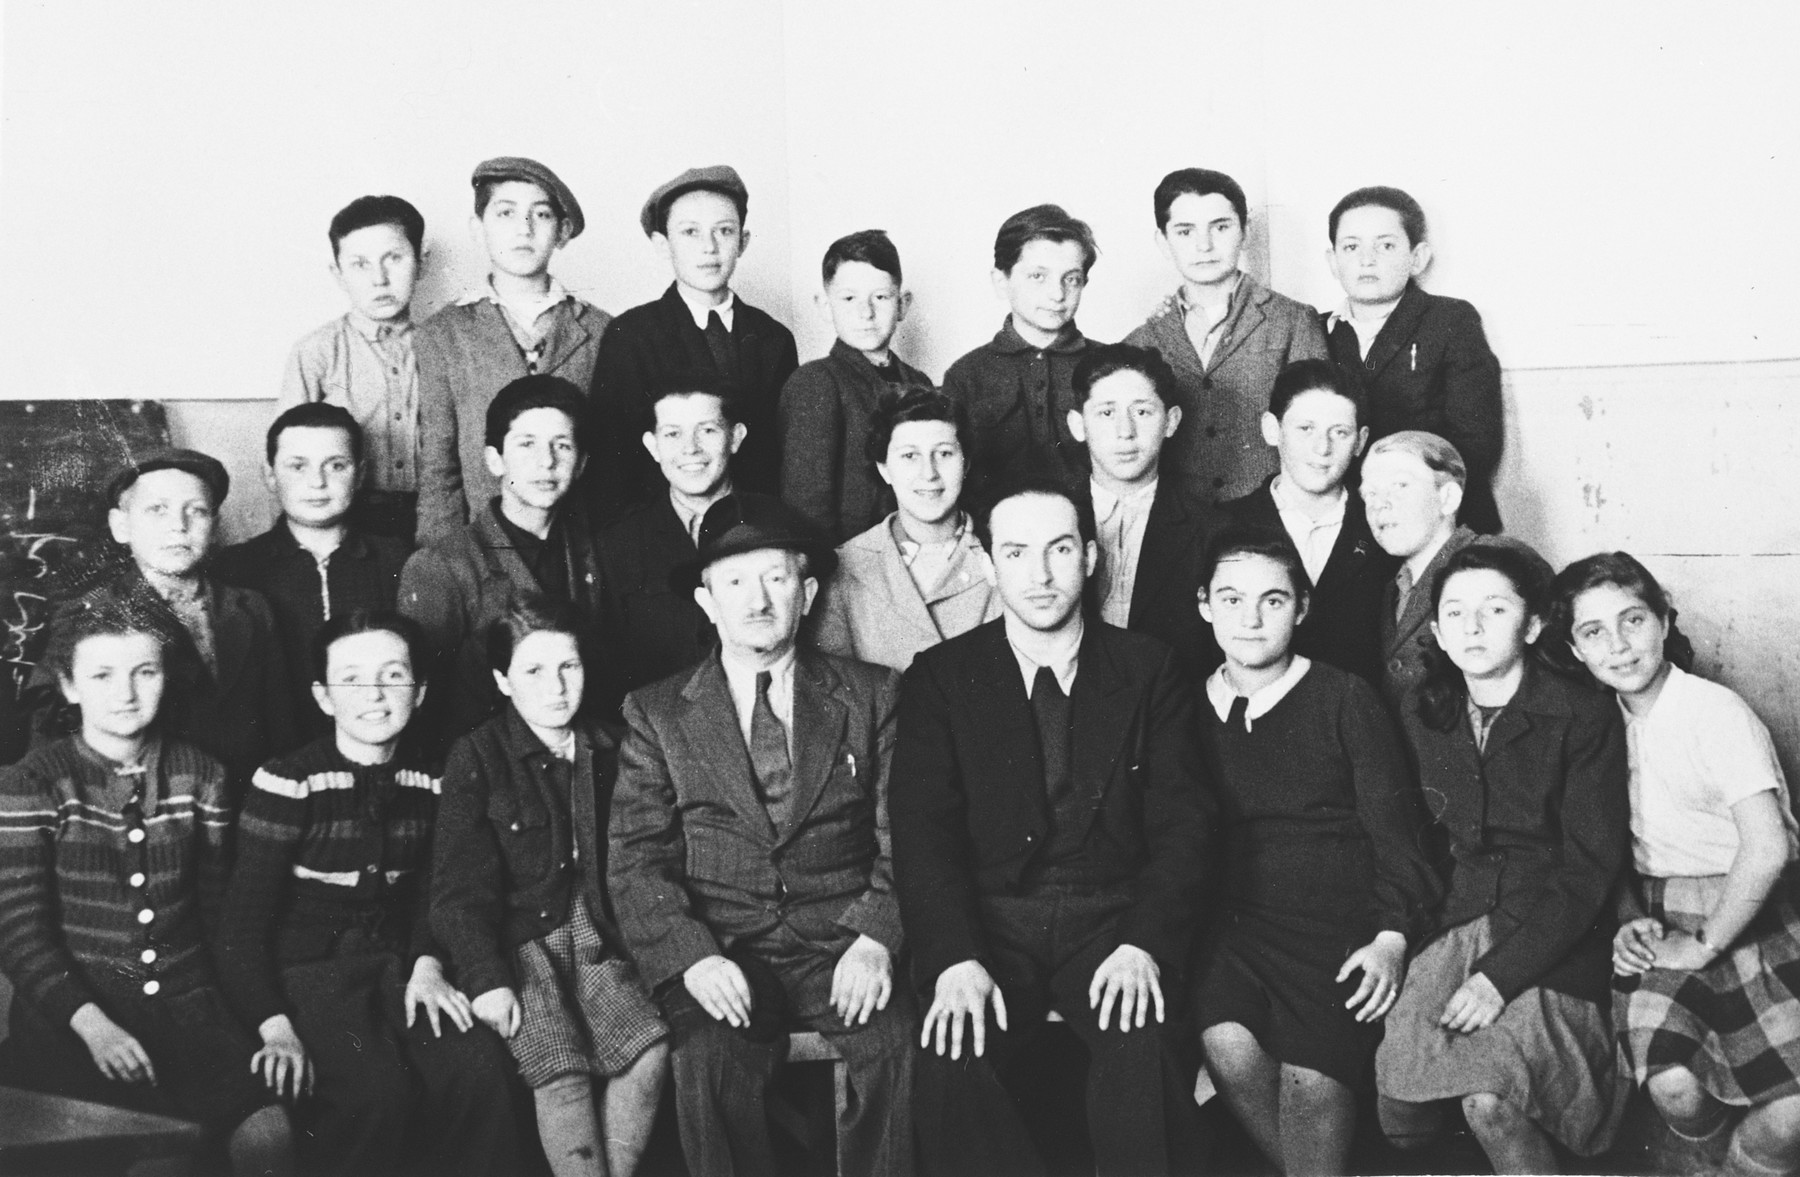 Group portrait of Jewish students and teachers in the Hasenecke DP camp school.

Pictured in the front row on the far right in the white shirt is Mania Wurm.